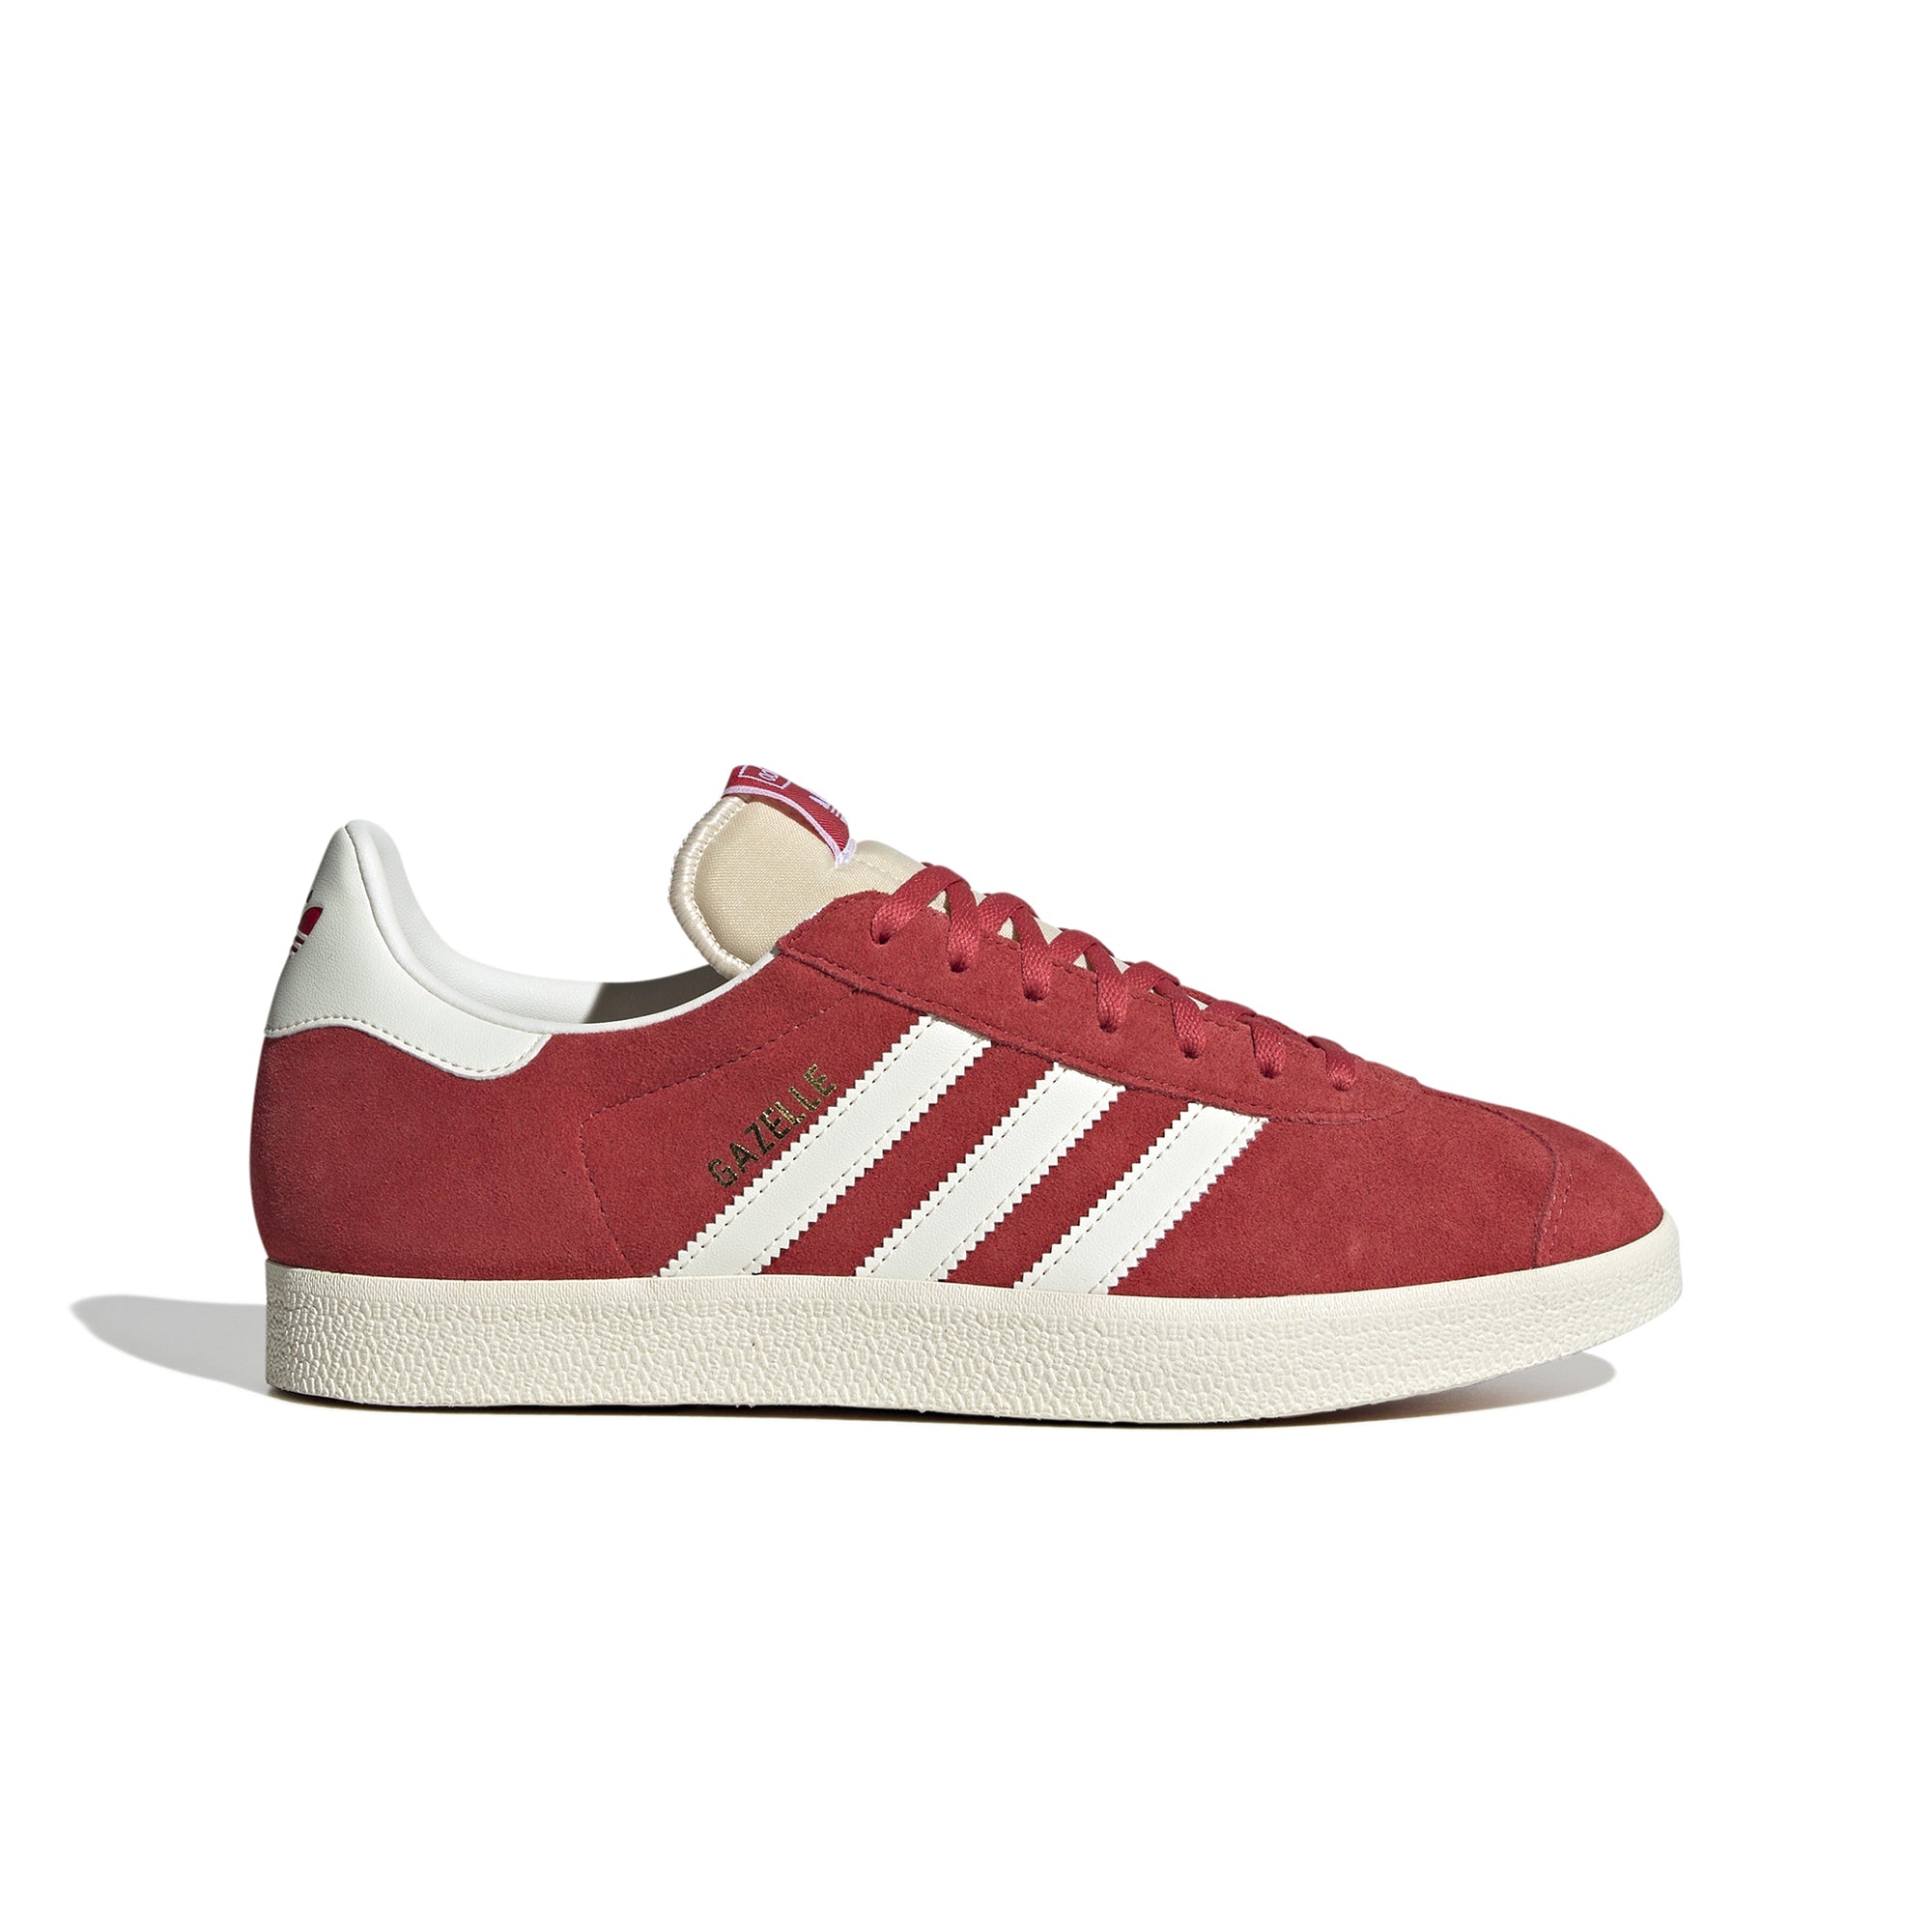 Adidas Gazelle Mens Suede Classic Pink White Low Sneakers Size 9